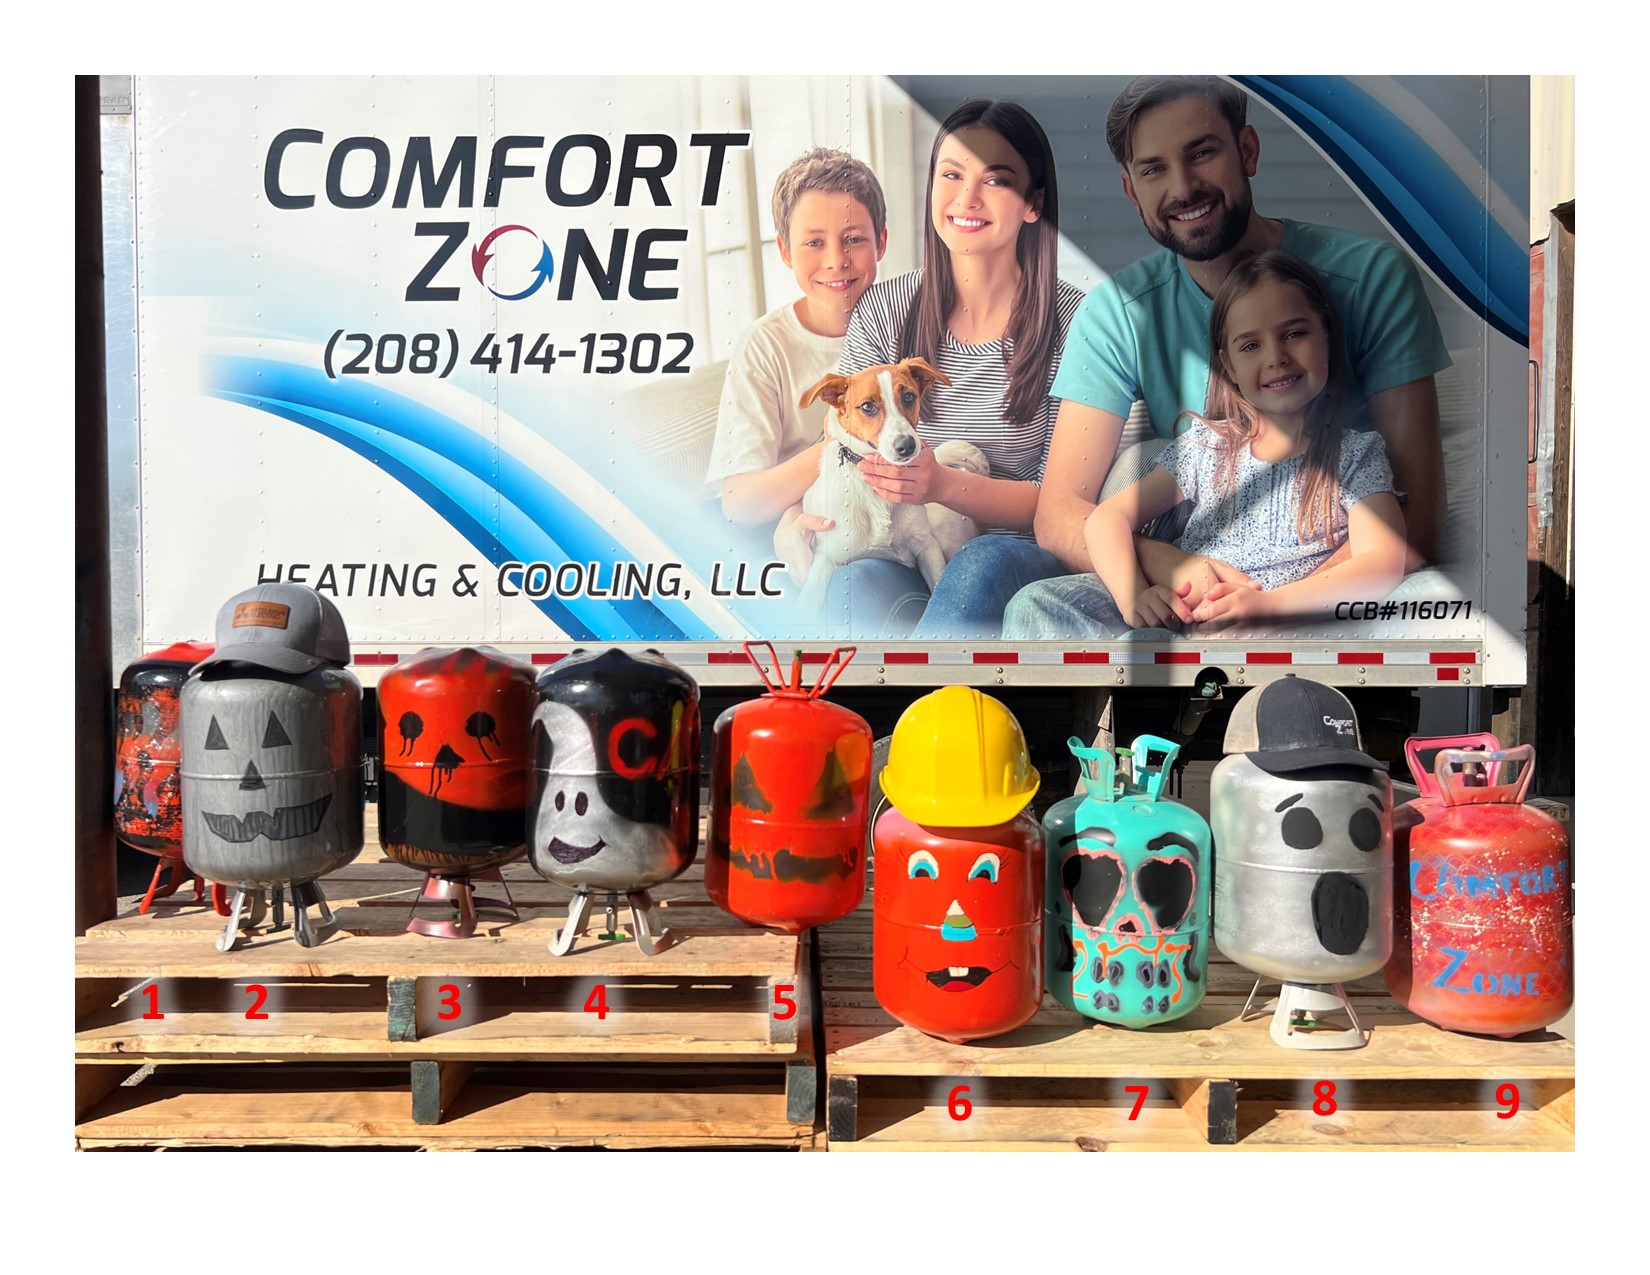 Comfort Zone Heating & Cooling 283 E Commercial St, Weiser Idaho 83672